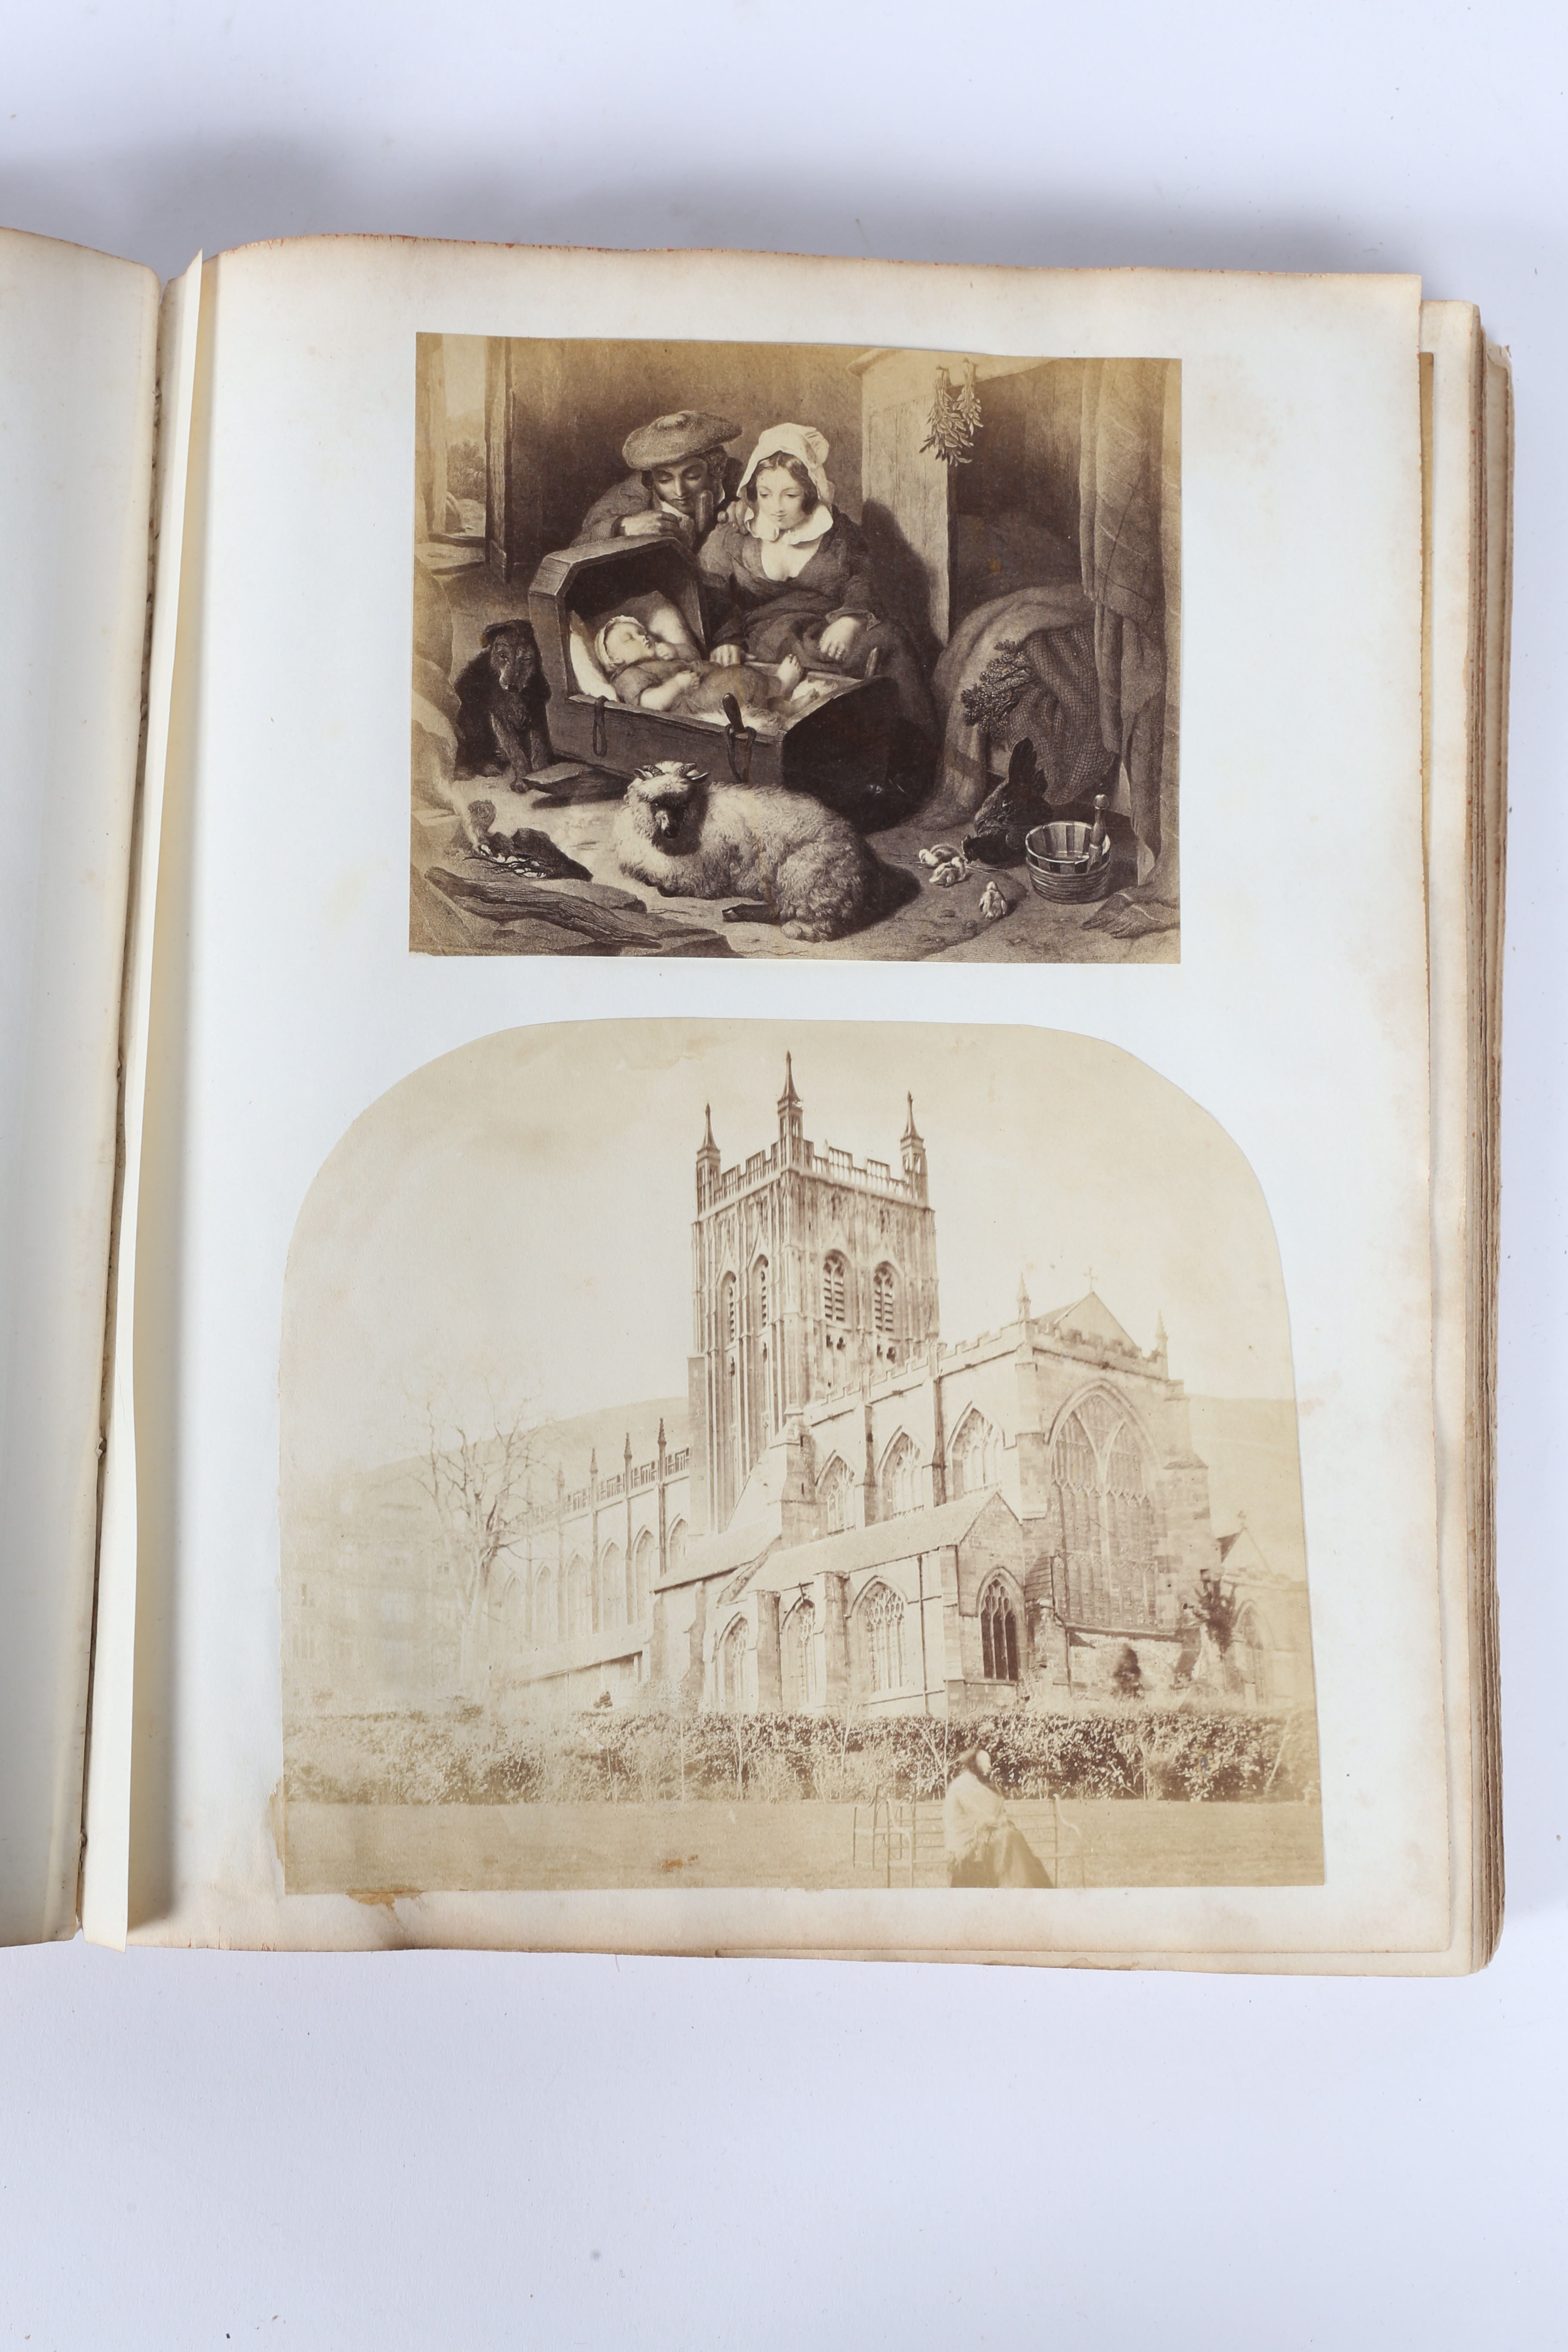 VICTORIAN PHOTOGRAPH ALBUM BELONGING TO GENERAL SIR HARRY JONES GCB DCL, AND HIS WIFE LADY CHARLOTTE - Image 29 of 60